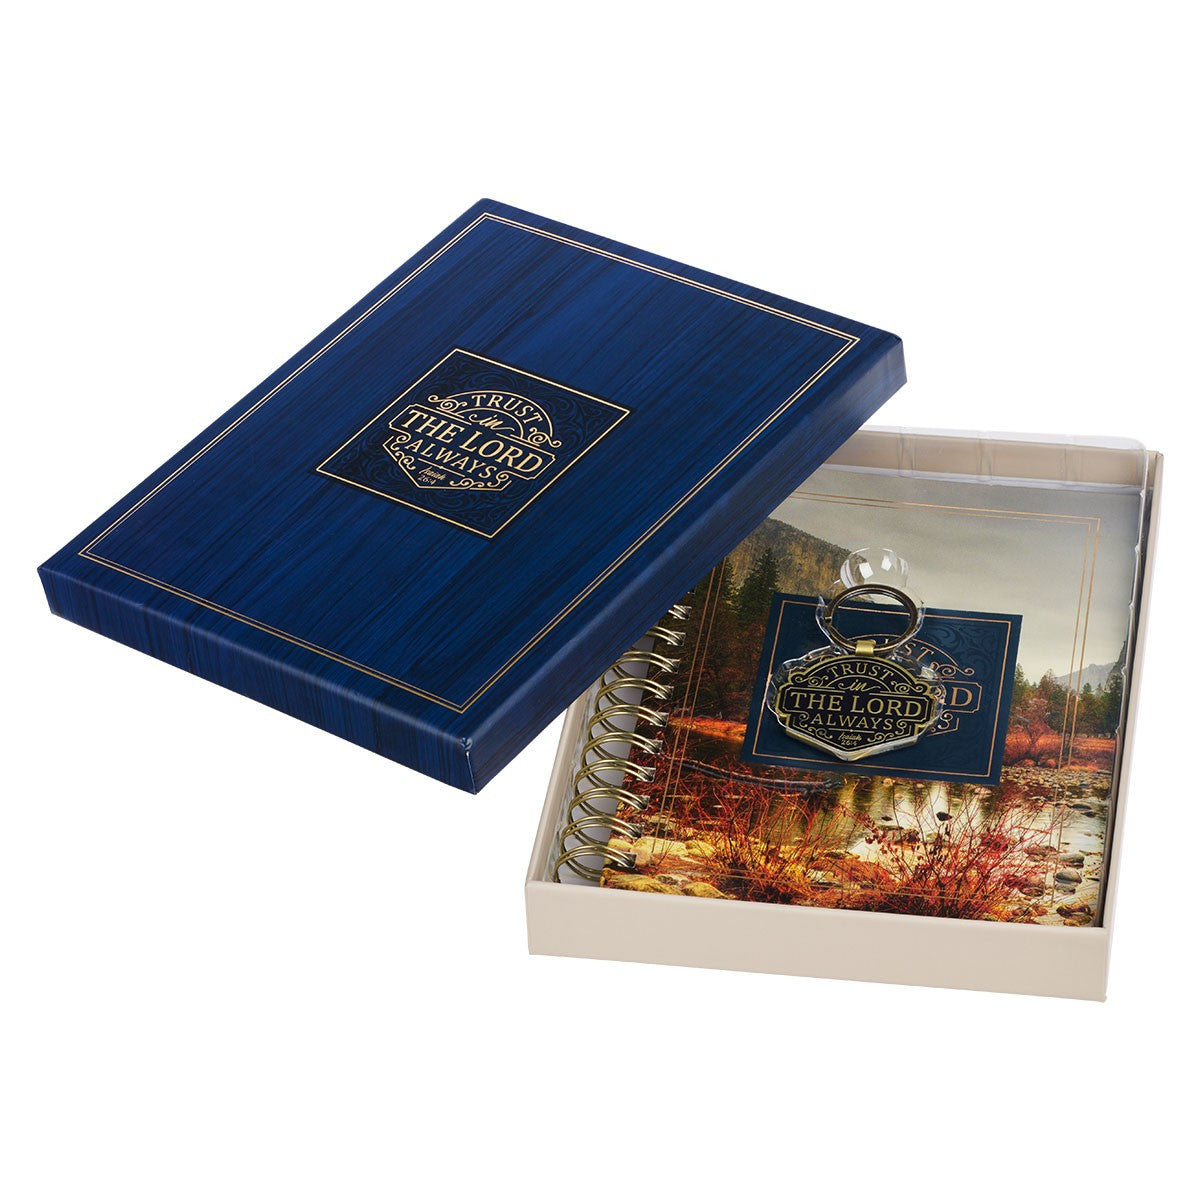 Trust in the LORD Journal and Key Ring Boxed Gift Set - Isaiah 26:4